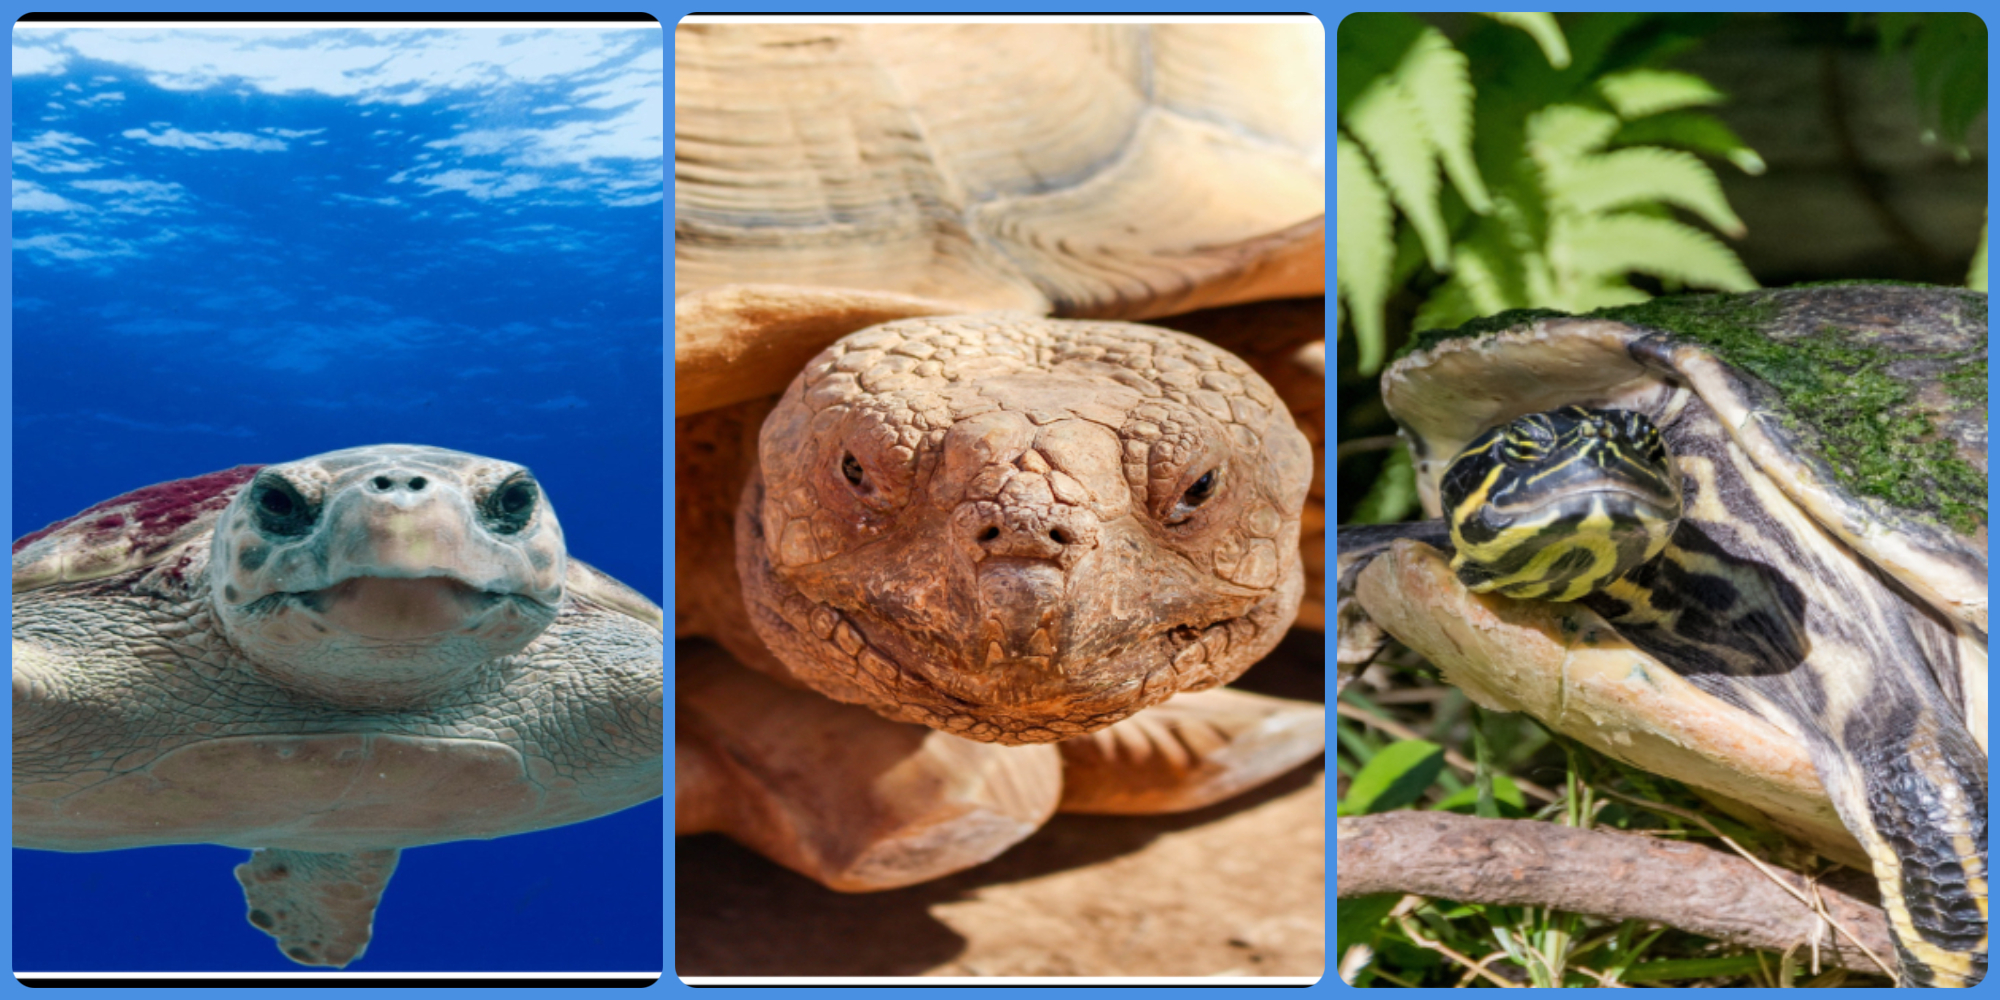 What do you know about Turtle, Tortoise and Terrapin?